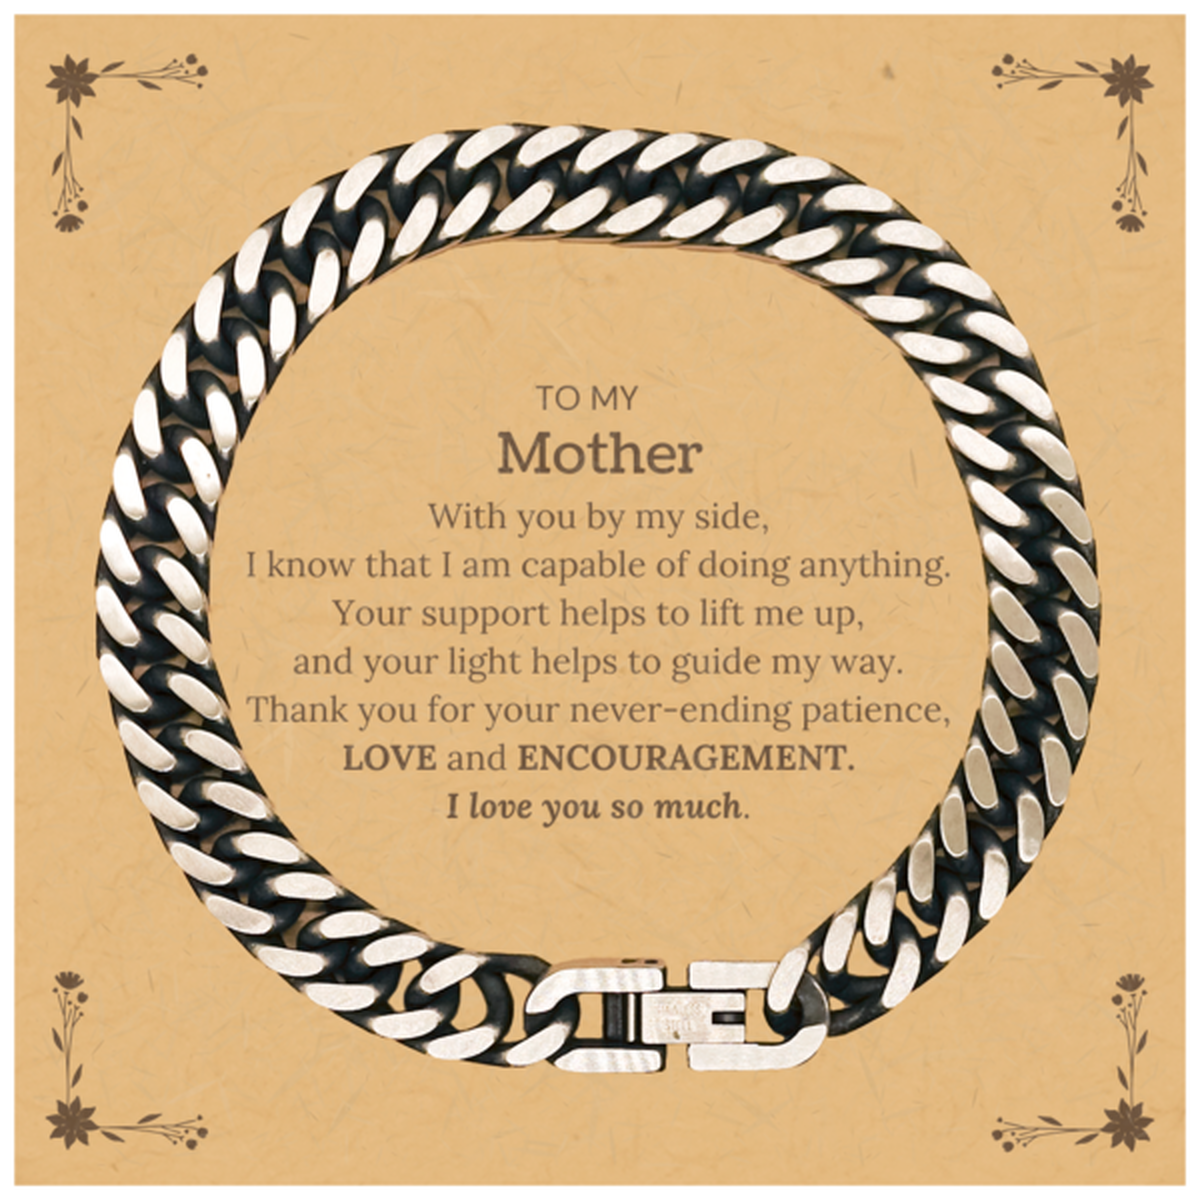 Appreciation Mother Cuban Link Chain Bracelet Gifts, To My Mother Birthday Christmas Wedding Keepsake Gifts for Mother With you by my side, I know that I am capable of doing anything. I love you so much